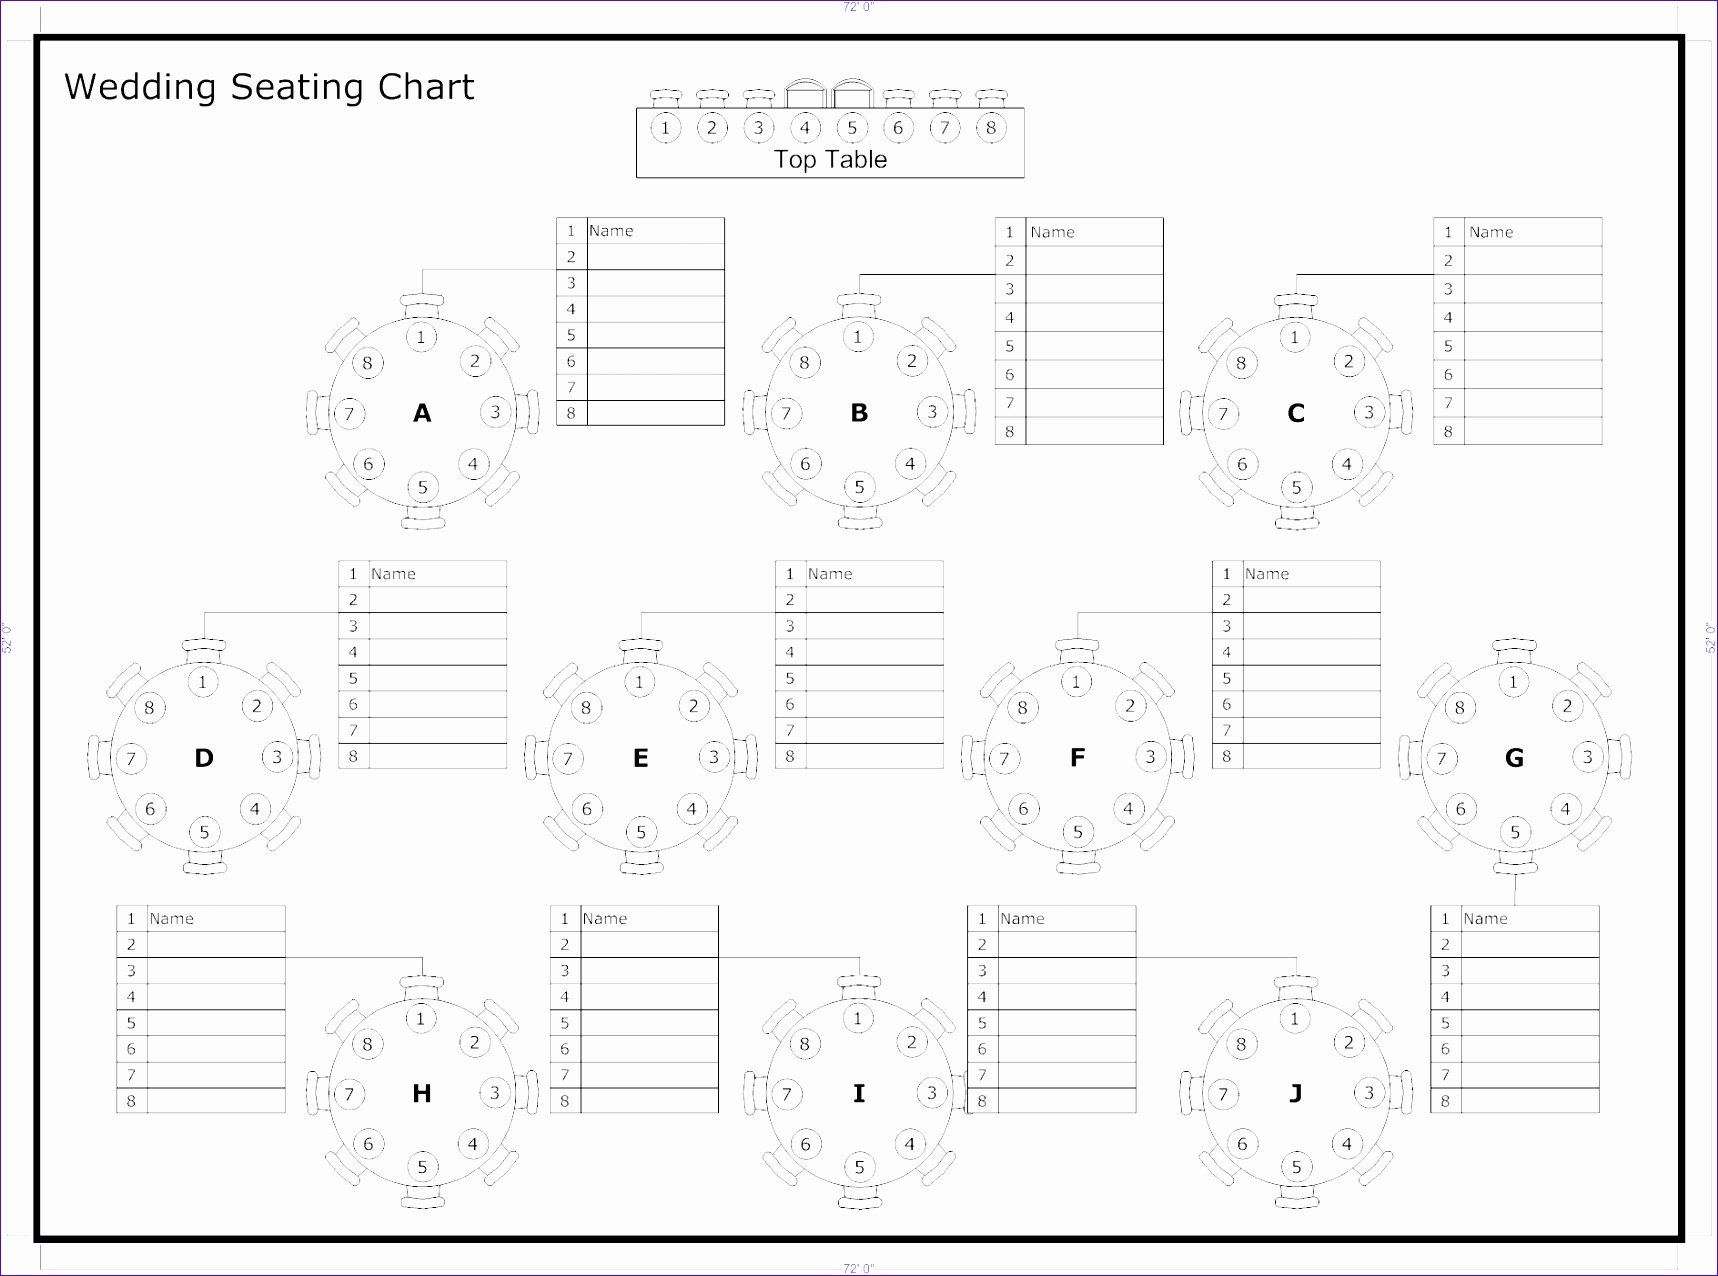 Restaurant Seating Chart Template Excel Awesome 12 Pareto Chart Excel Template Free Exceltemplates